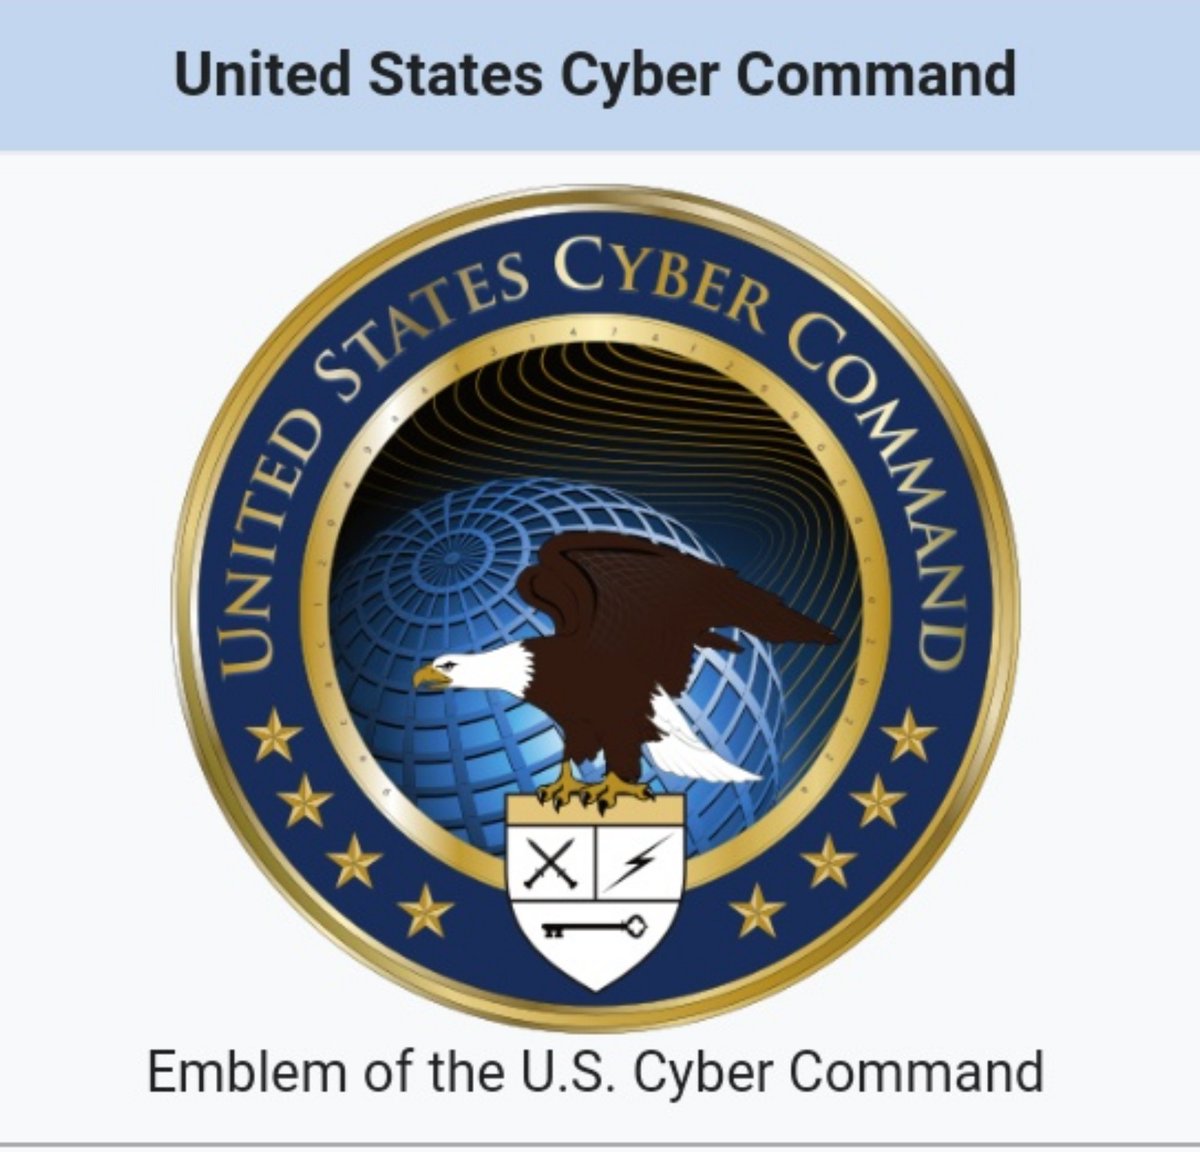 United States Cyber Command (USCYBERCOM) is one of the eleven unified combatant commands of the United States' Department of Defense. It unifies the direction of cyberspace operations, strengthens DoD cyberspace capabilities https://en.wikipedia.org/wiki/United_States_Cyber_Command